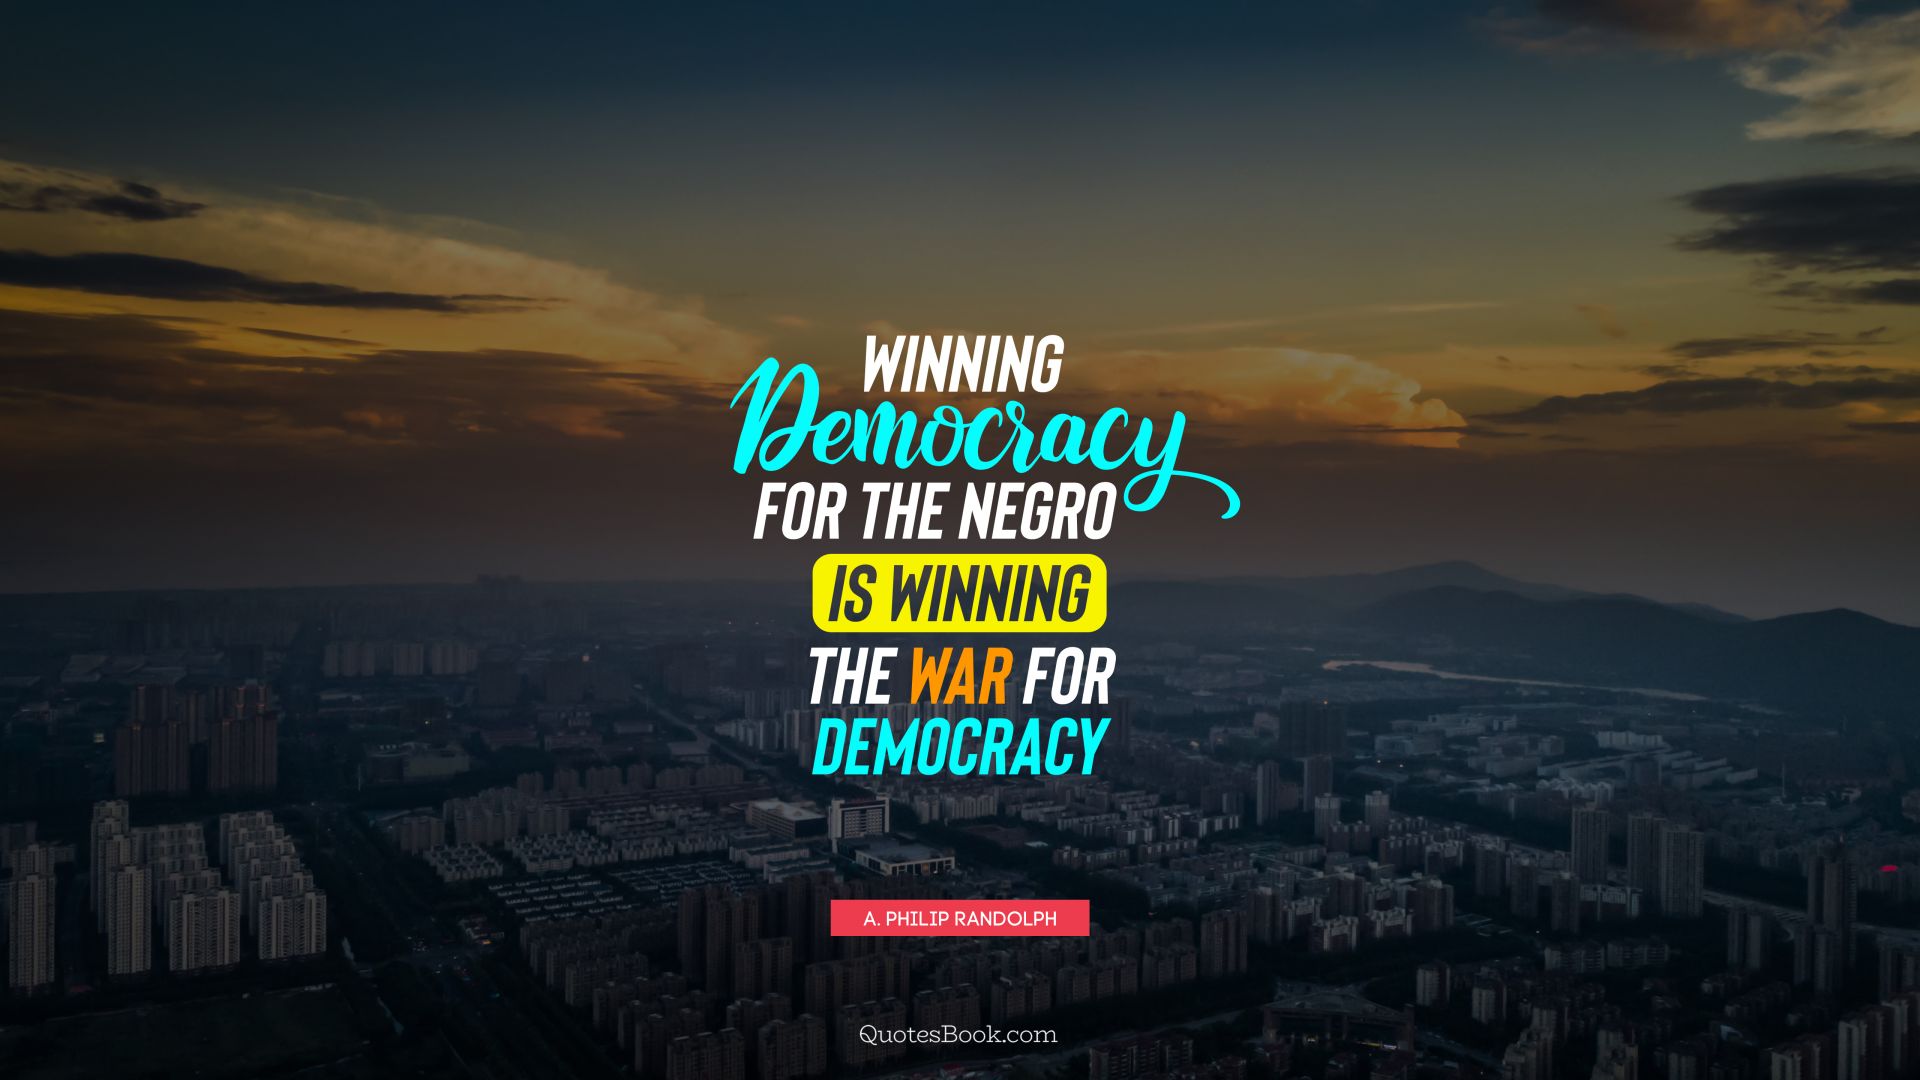 Winning democracy for the negro is winning the war for democracy. - Quote by A. Philip Randolph